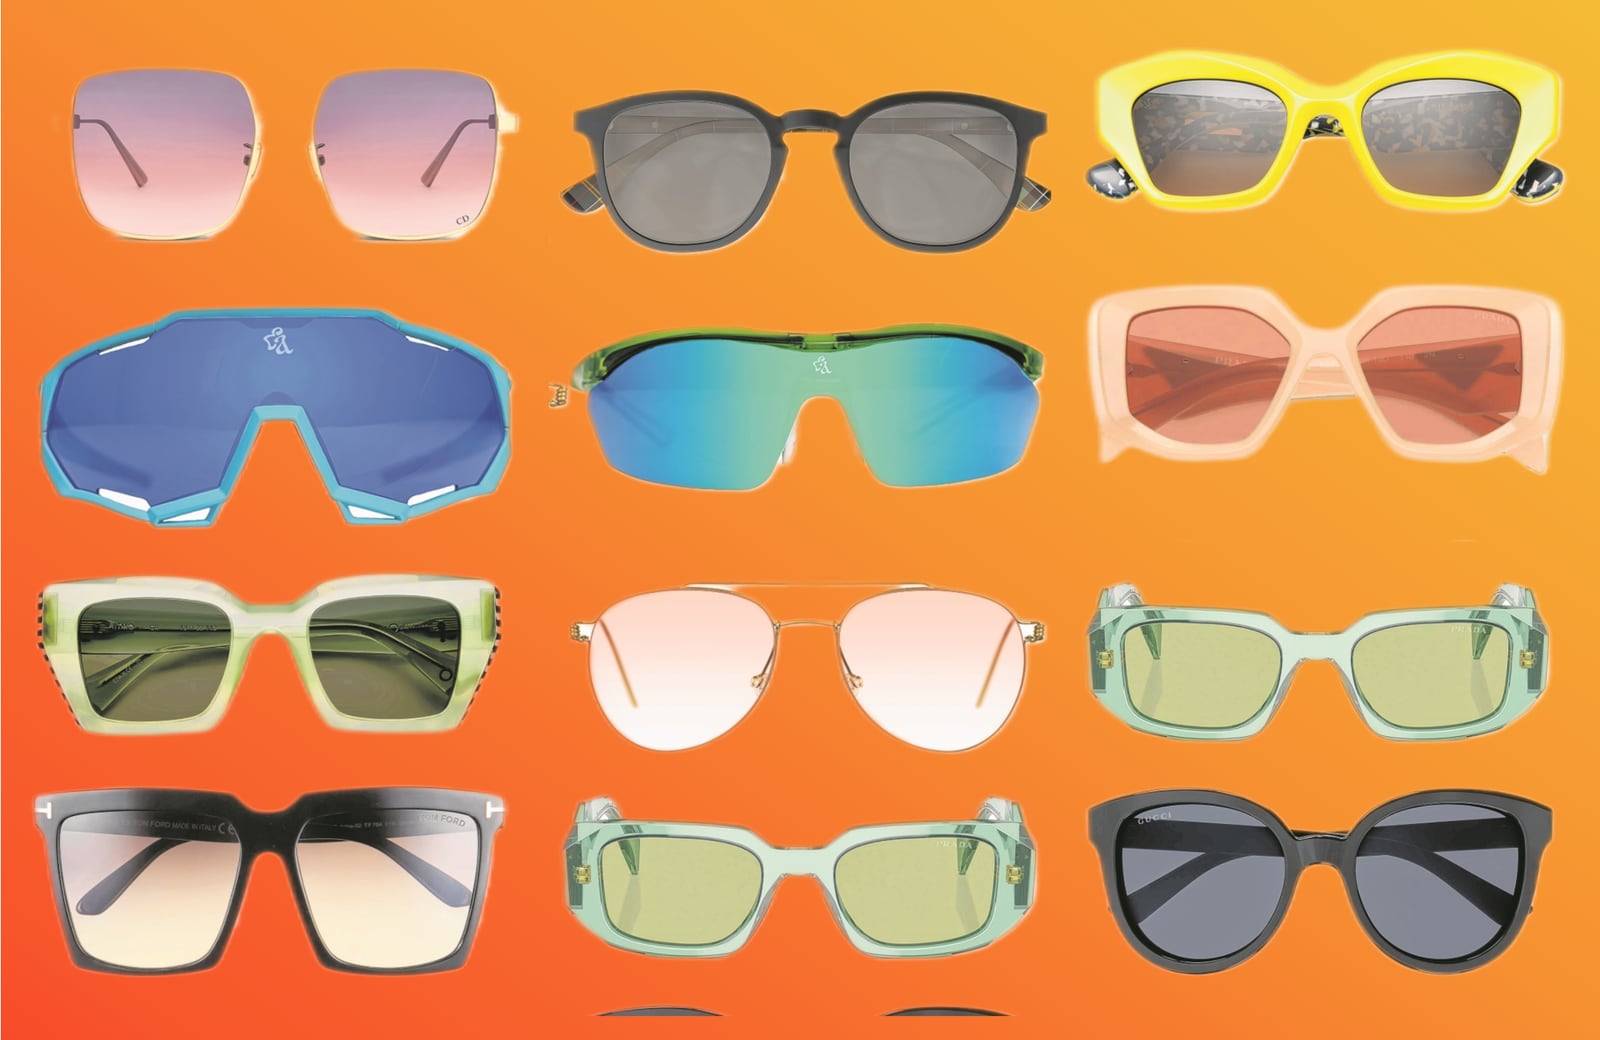 Sunglasses for every shape of face